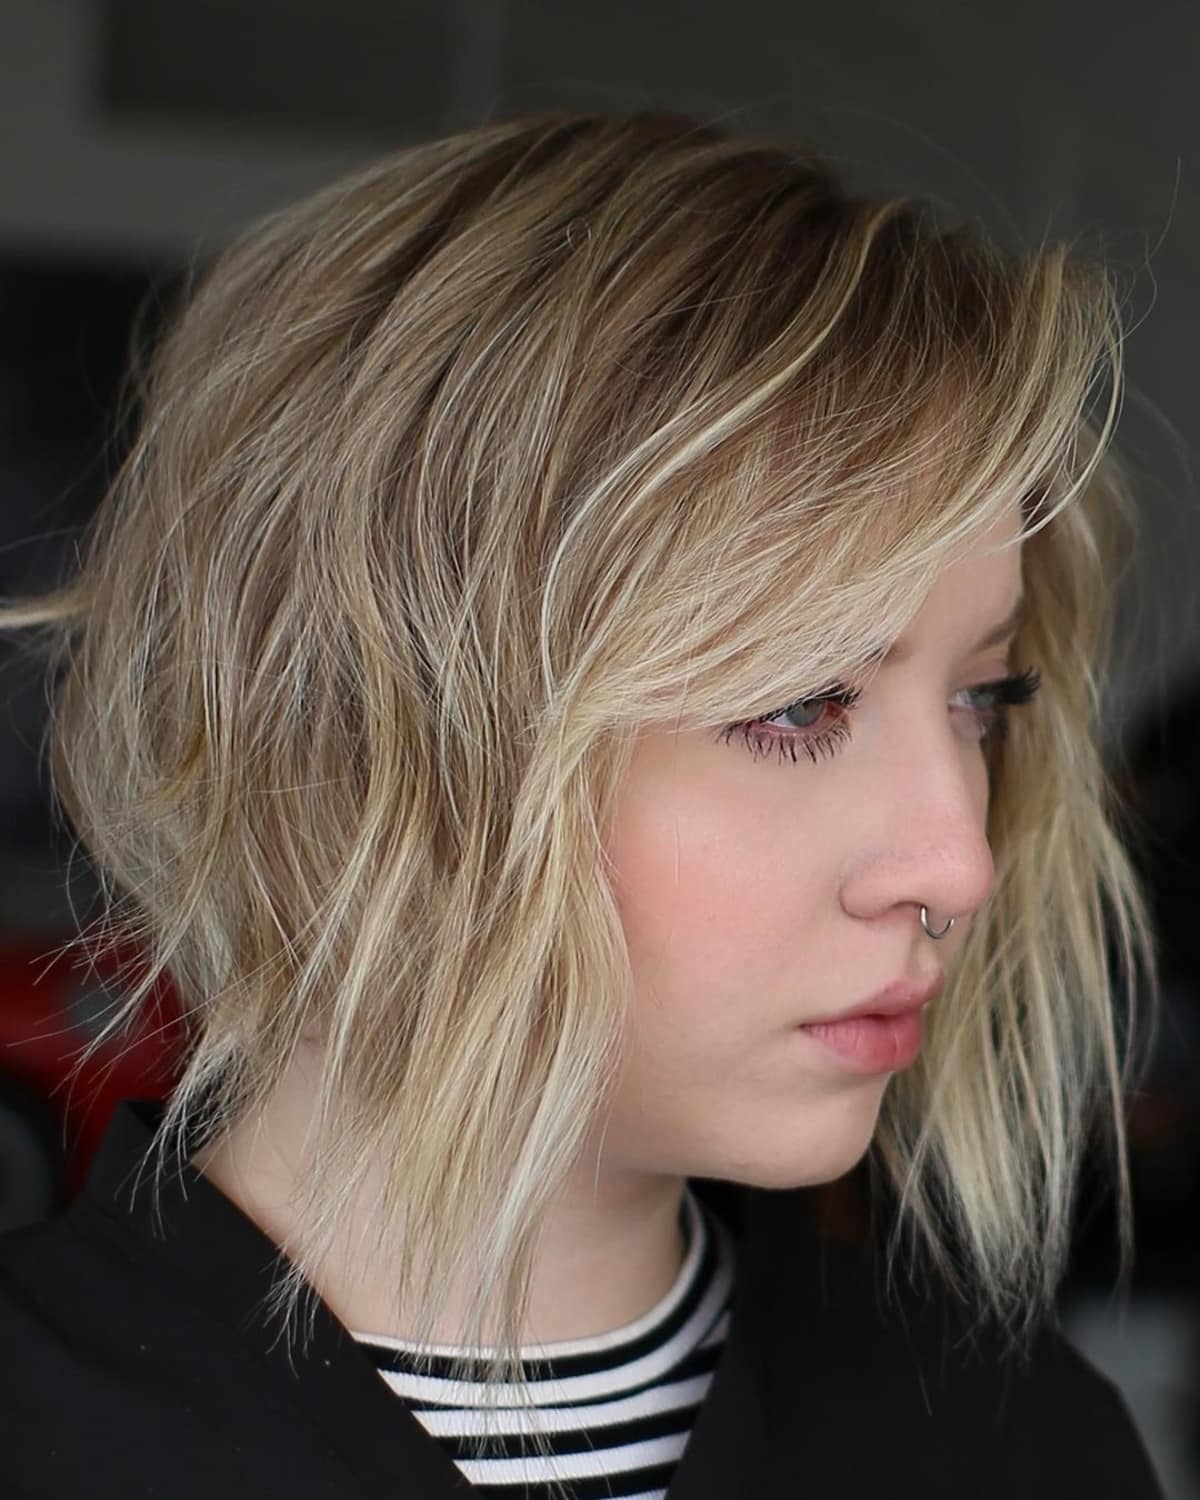 20 Fantastic Short to Medium Layered Haircuts for That In-Between Length